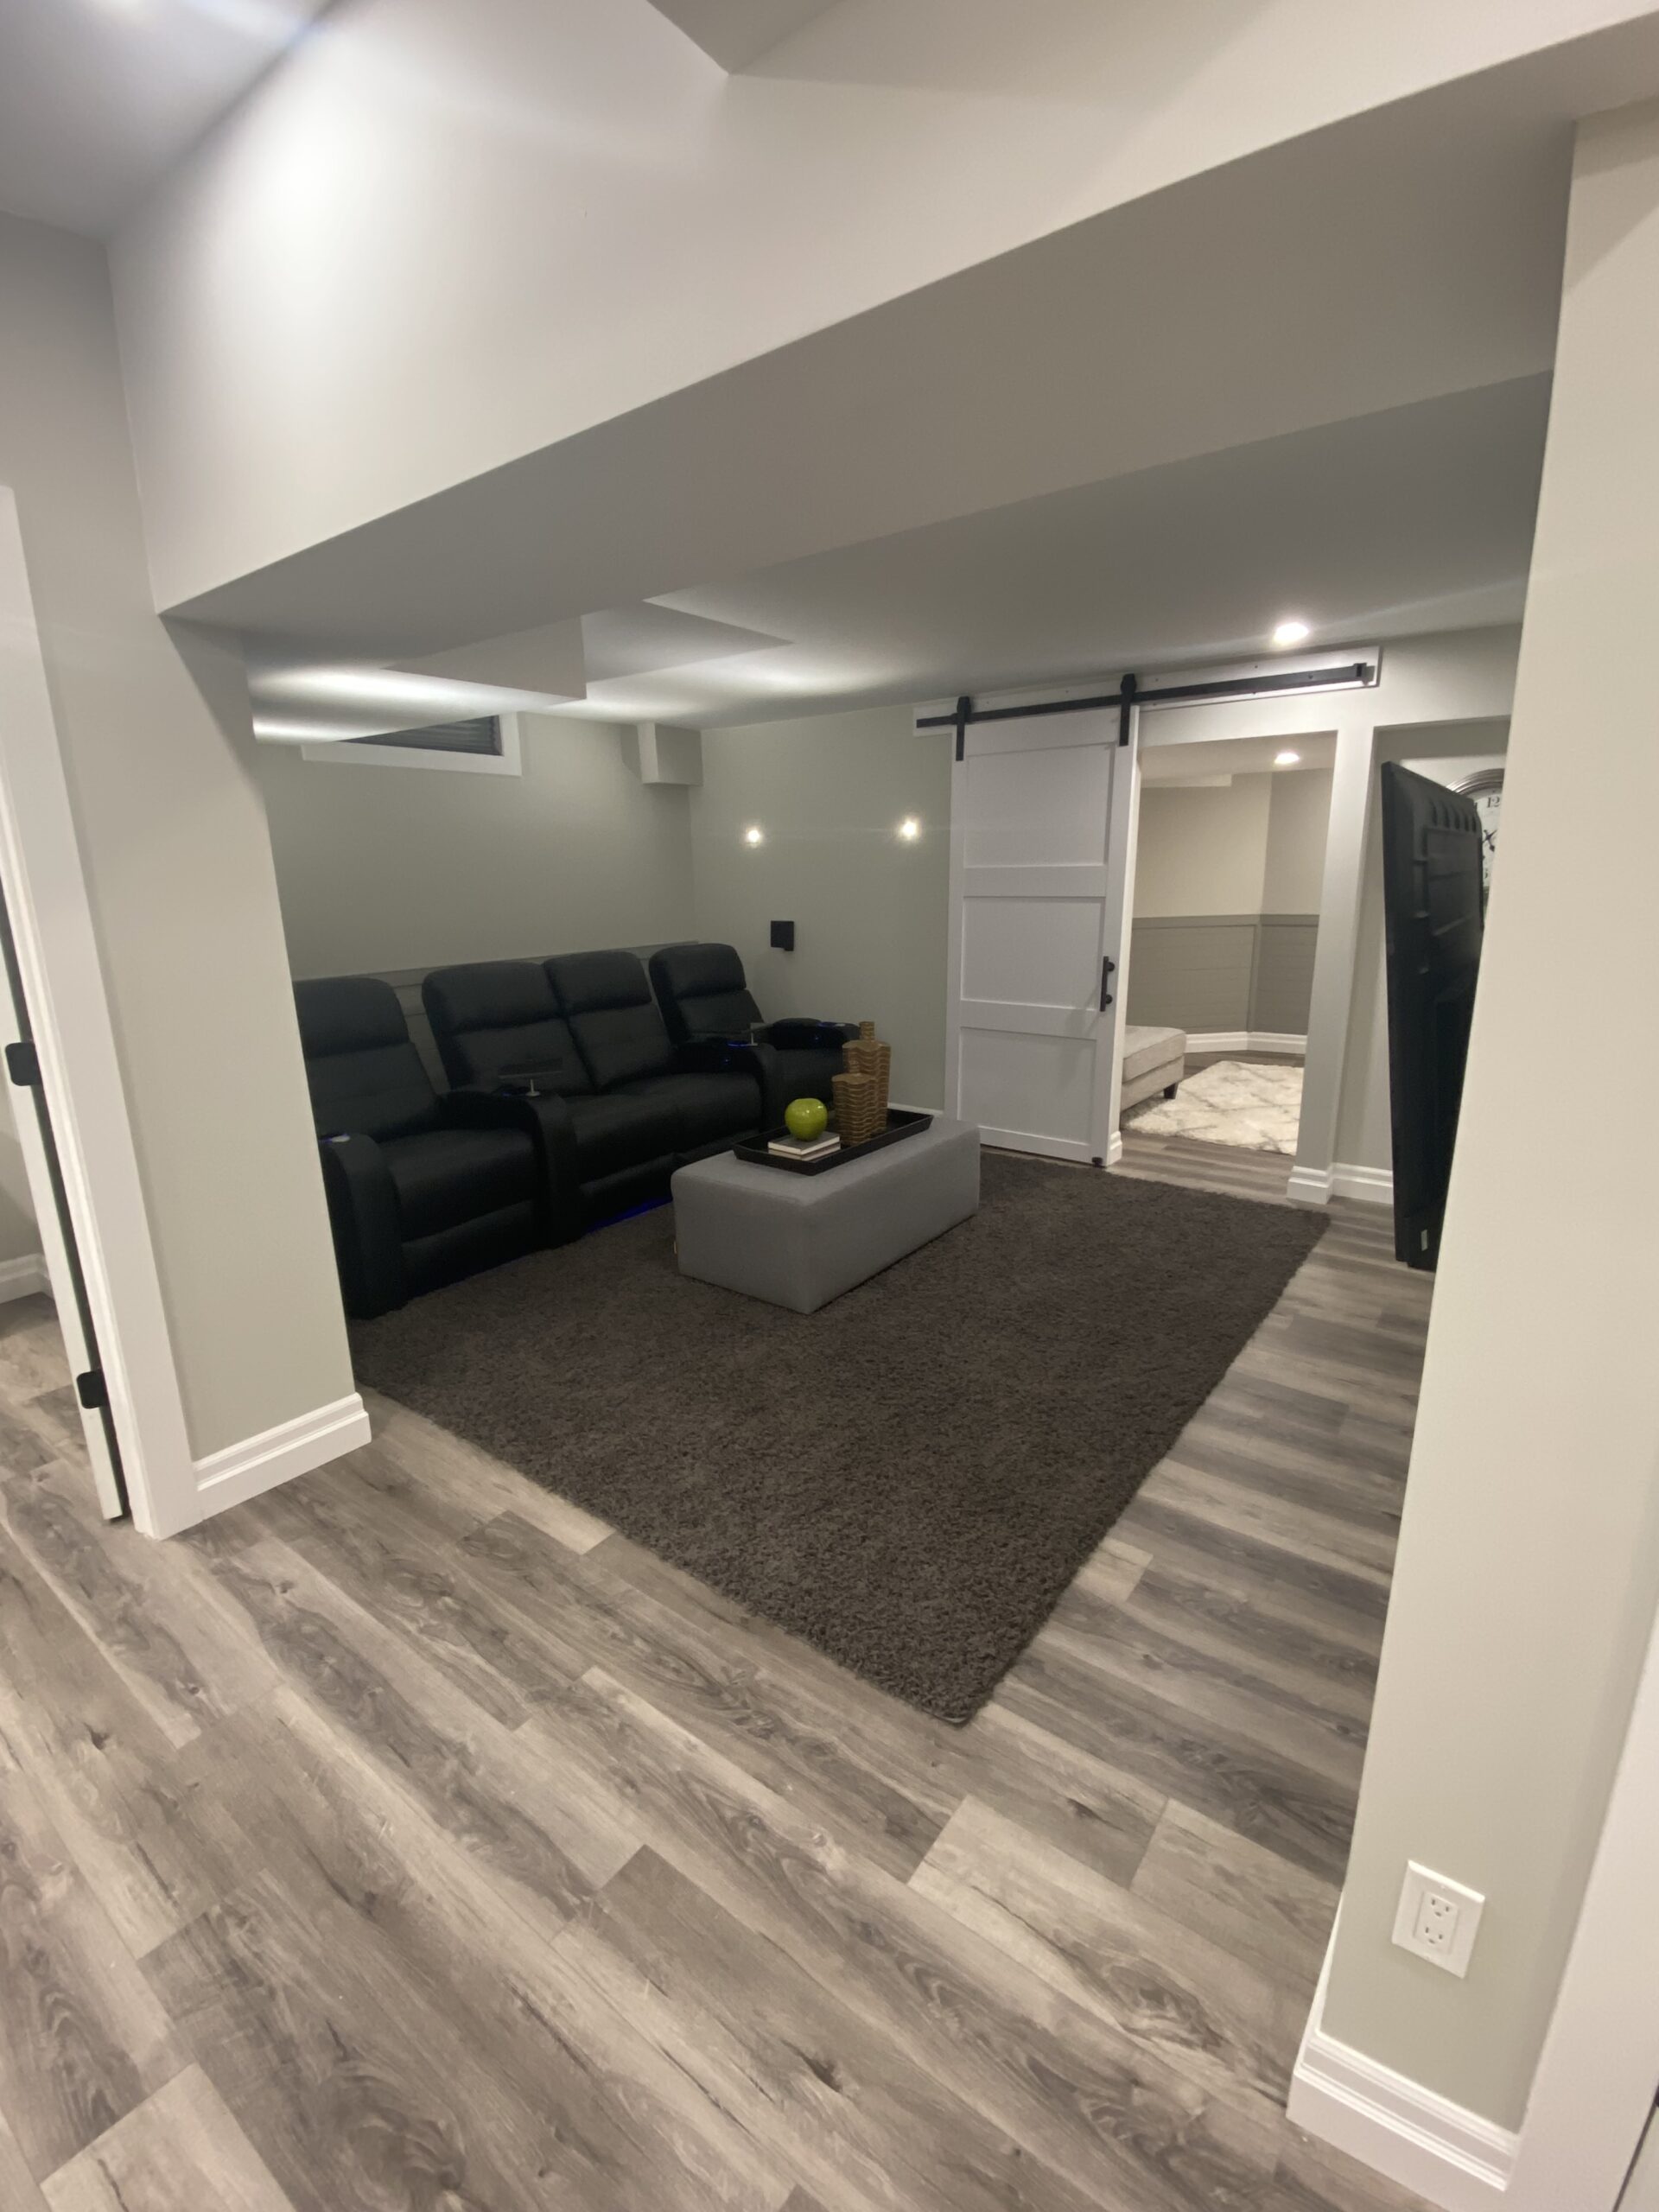 A basement renovated by Titan General as part of a whole home renovation